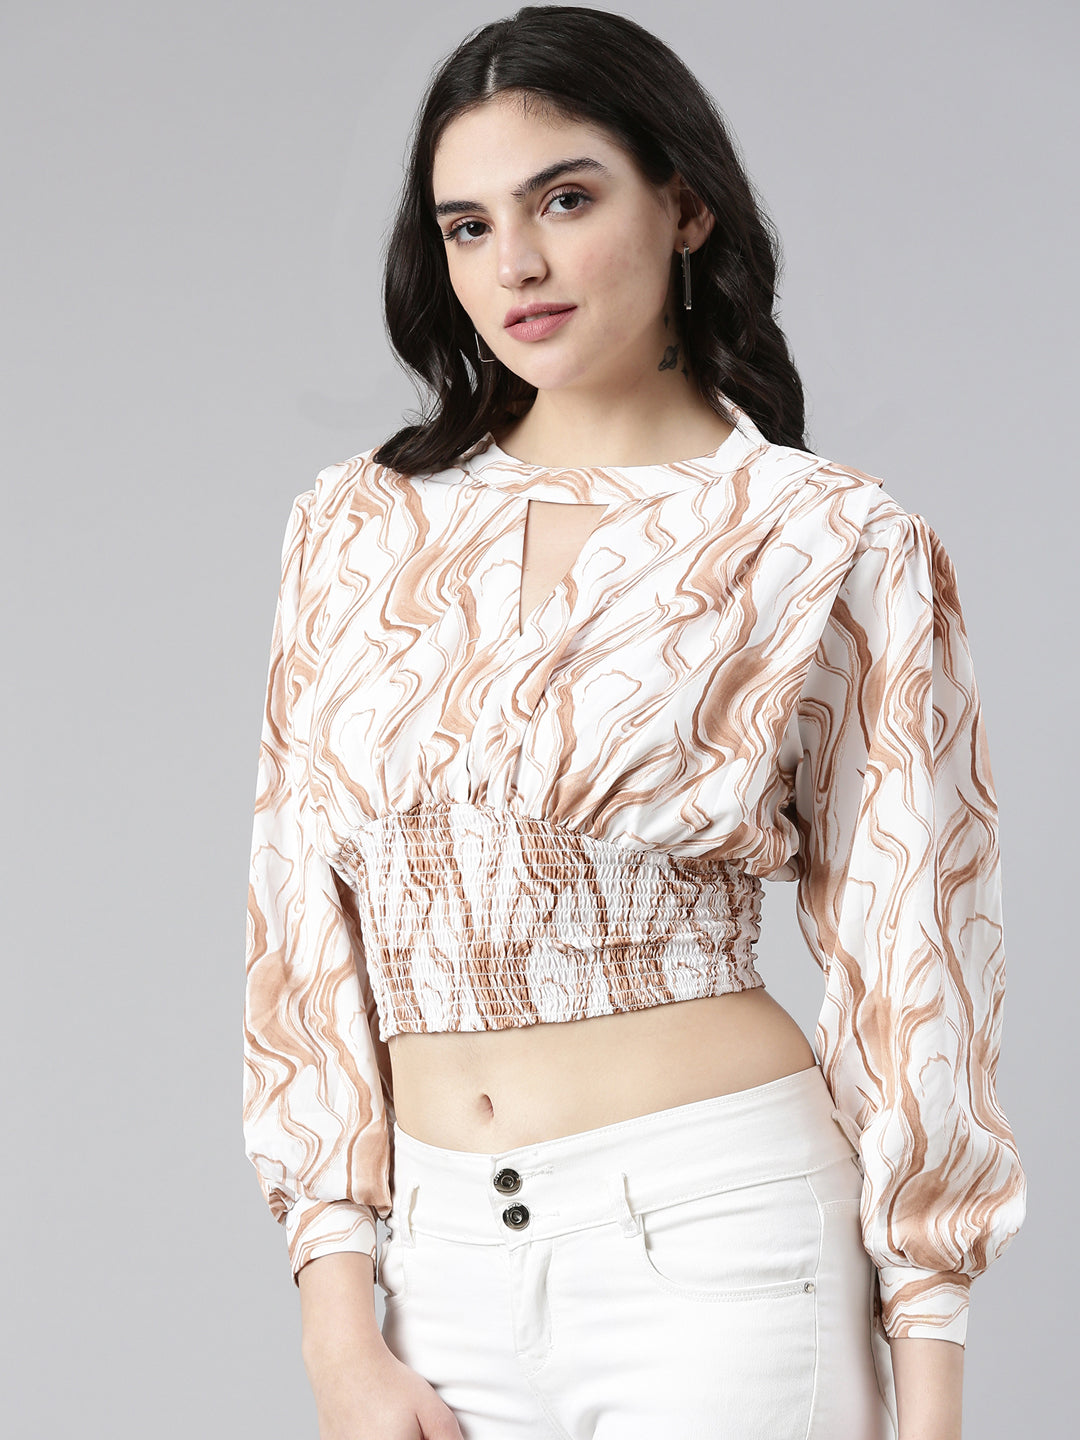 Keyhole Neck Cuffed Sleeves Abstract Cinched Waist Brown Crop Top